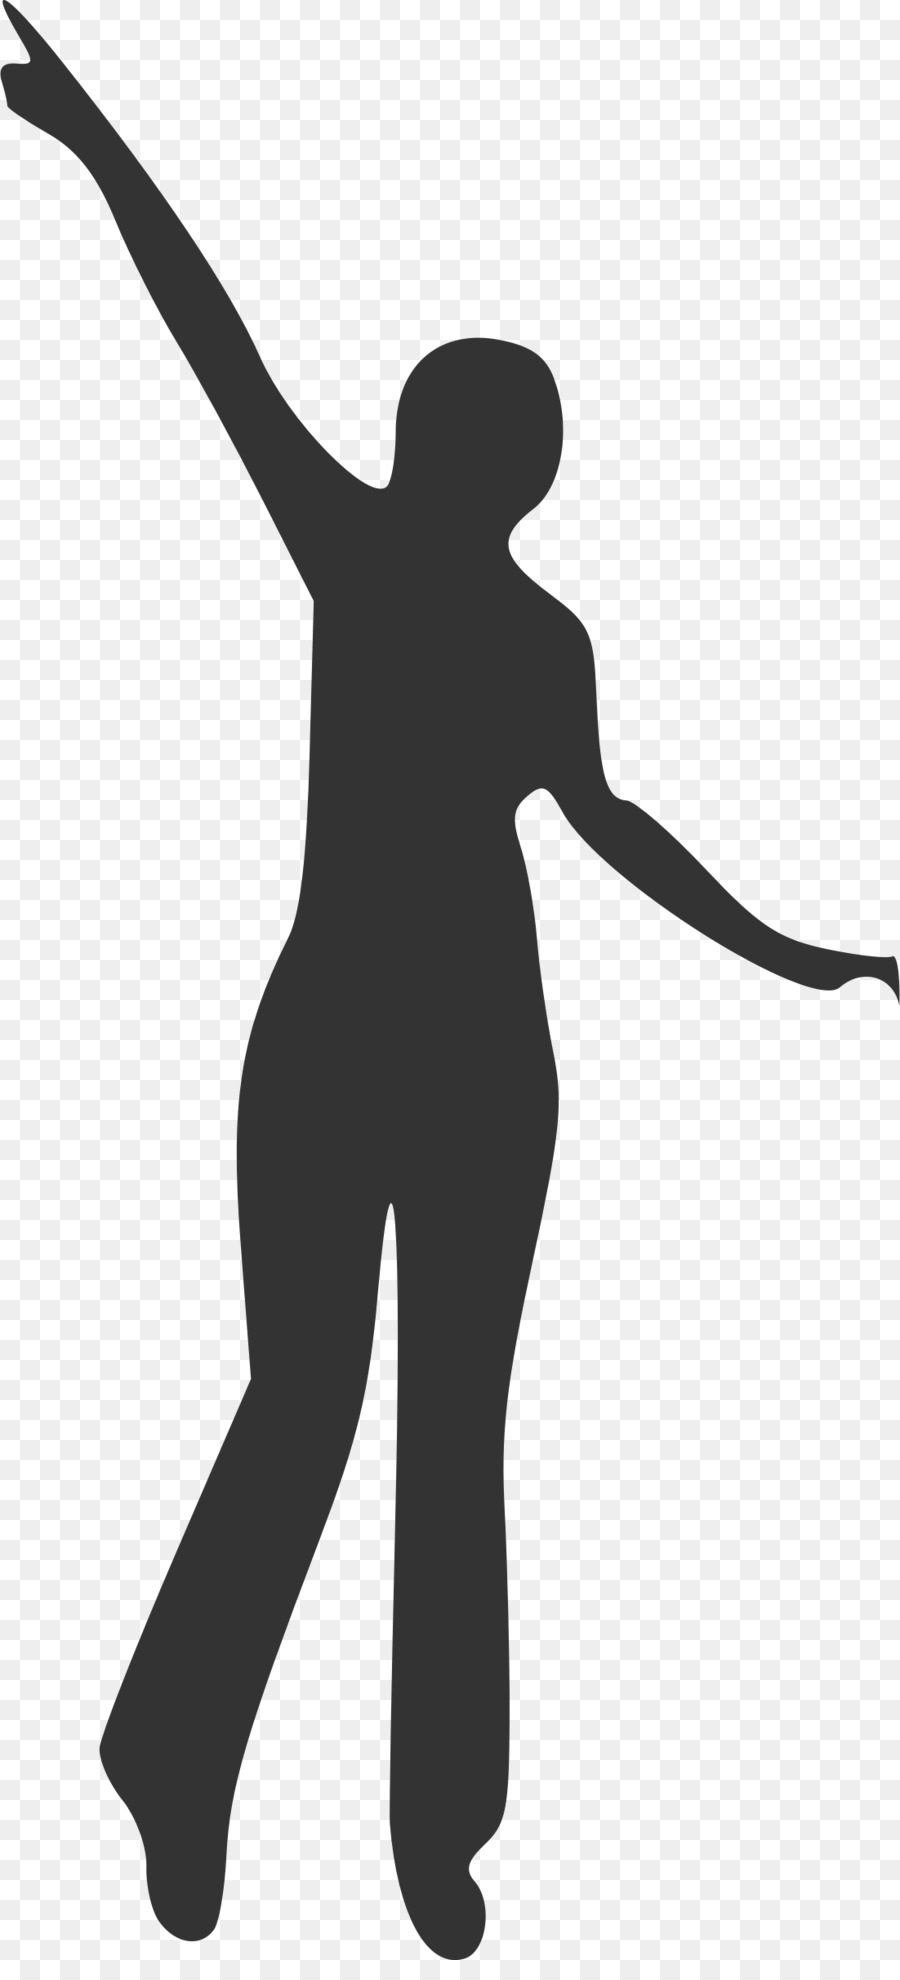 Silhouette Drawing Woman Clip art - pointing png download - 1102*2400 - Free Transparent Silhouette png Download.